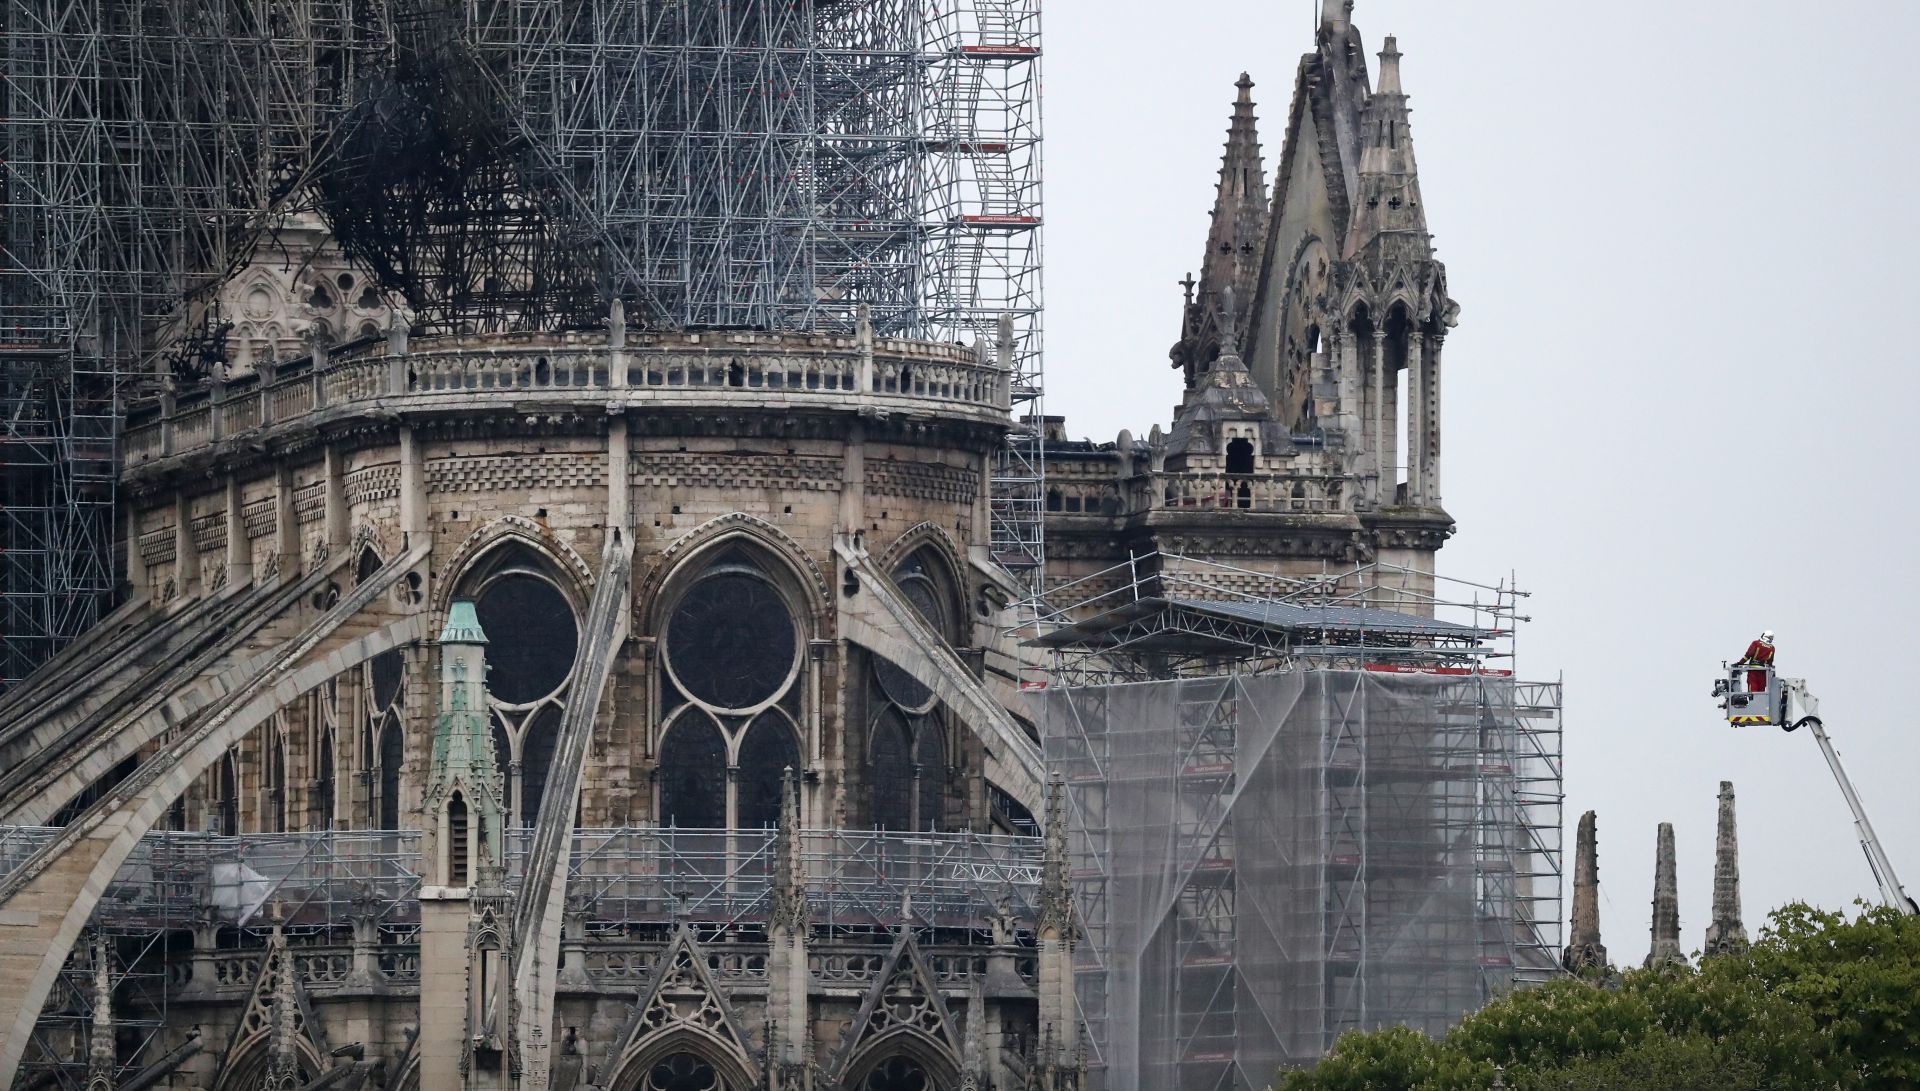 epa07509275 A firefighter stands in an aerial lift near the burnt roof after a massive fire destroyed the roof of the Notre-Dame Cathedral in Paris, France, 16 April 2019. A fire started in the late afternoon on 15 April in one of the most visited monuments of the French capital.  EPA/IAN LANGSDON